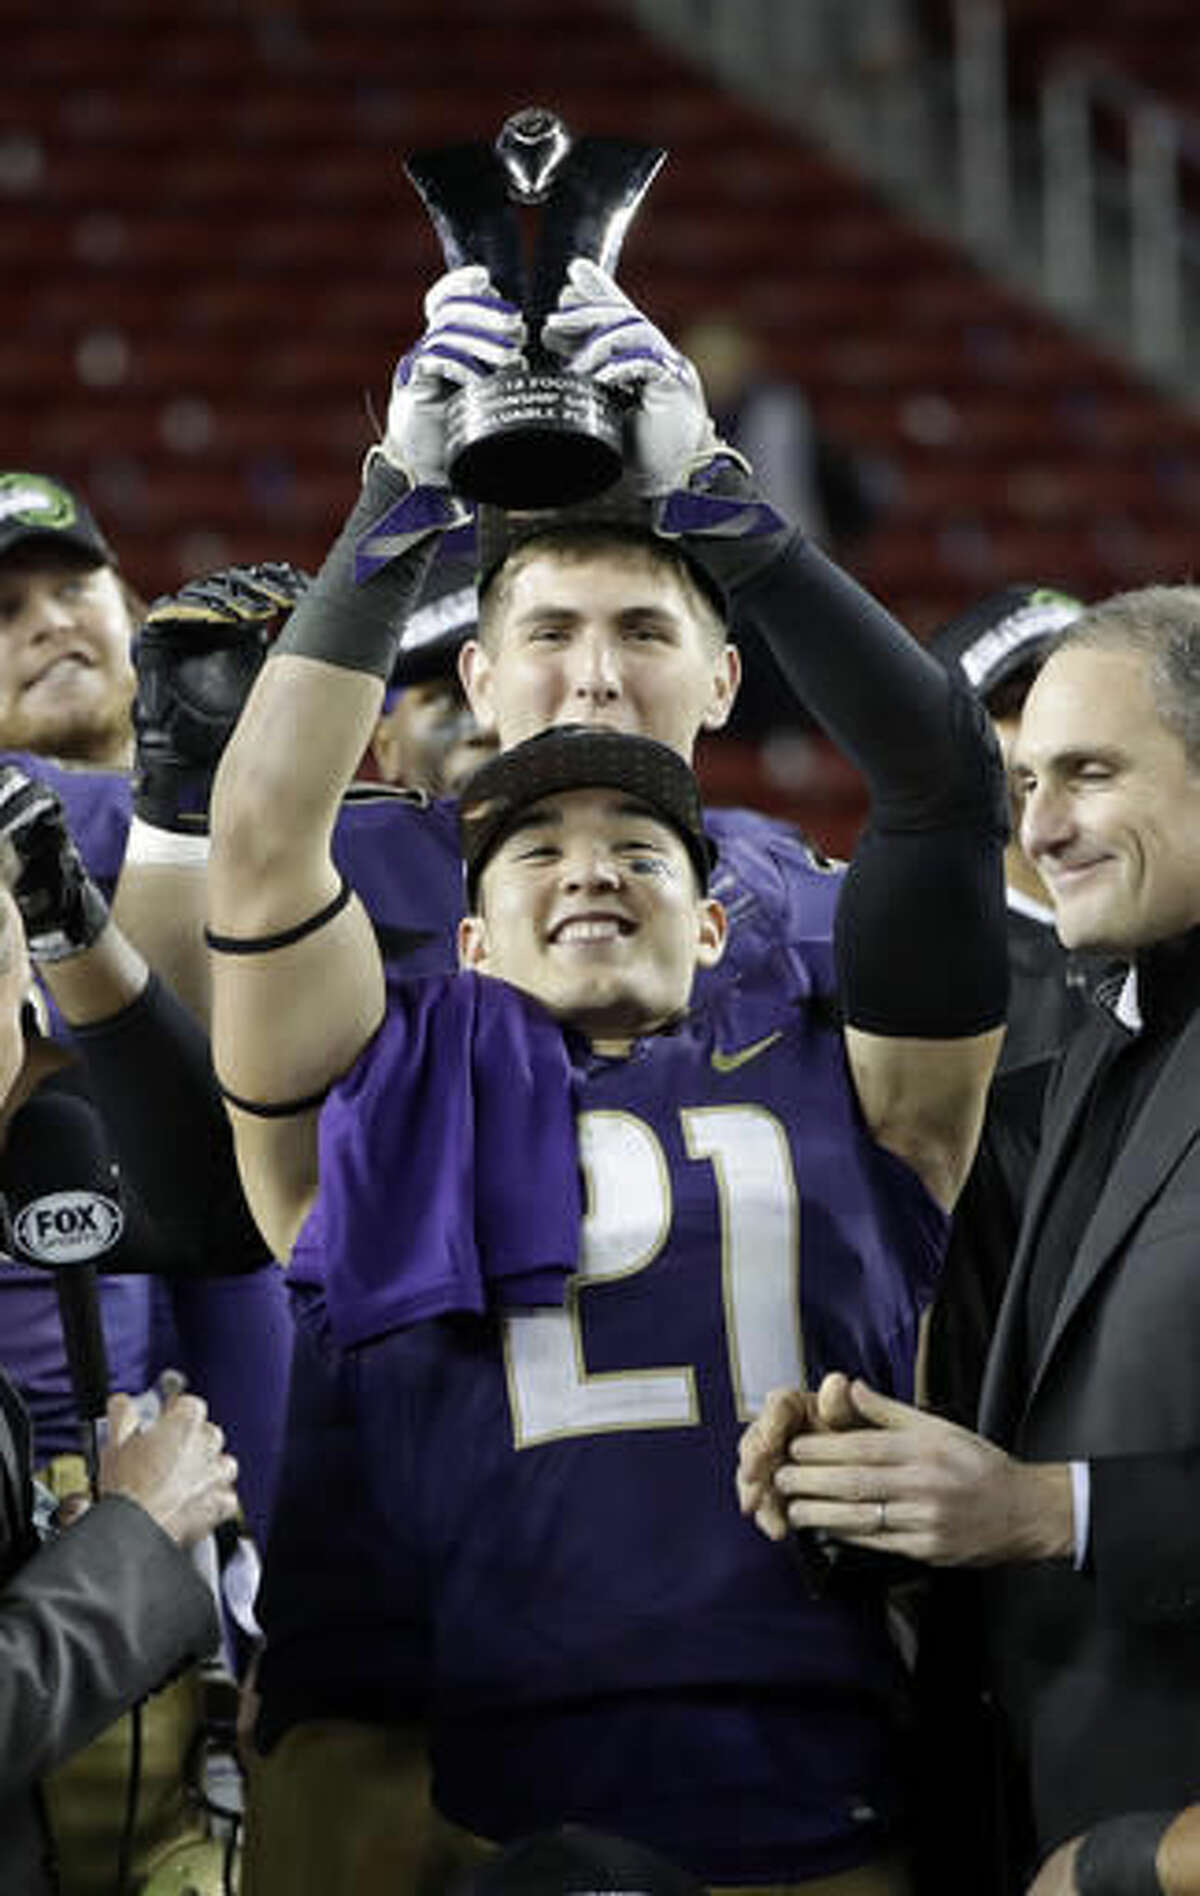 Washington defensive back Taylor Rapp (21) holds the game MVP trophy after Washington's 41-10 win over Colorado in the Pac-12 Conference championship NCAA college football game Friday, Dec. 2, 2016, in Santa Clara, Calif. (AP Photo/Marcio Jose Sanchez)